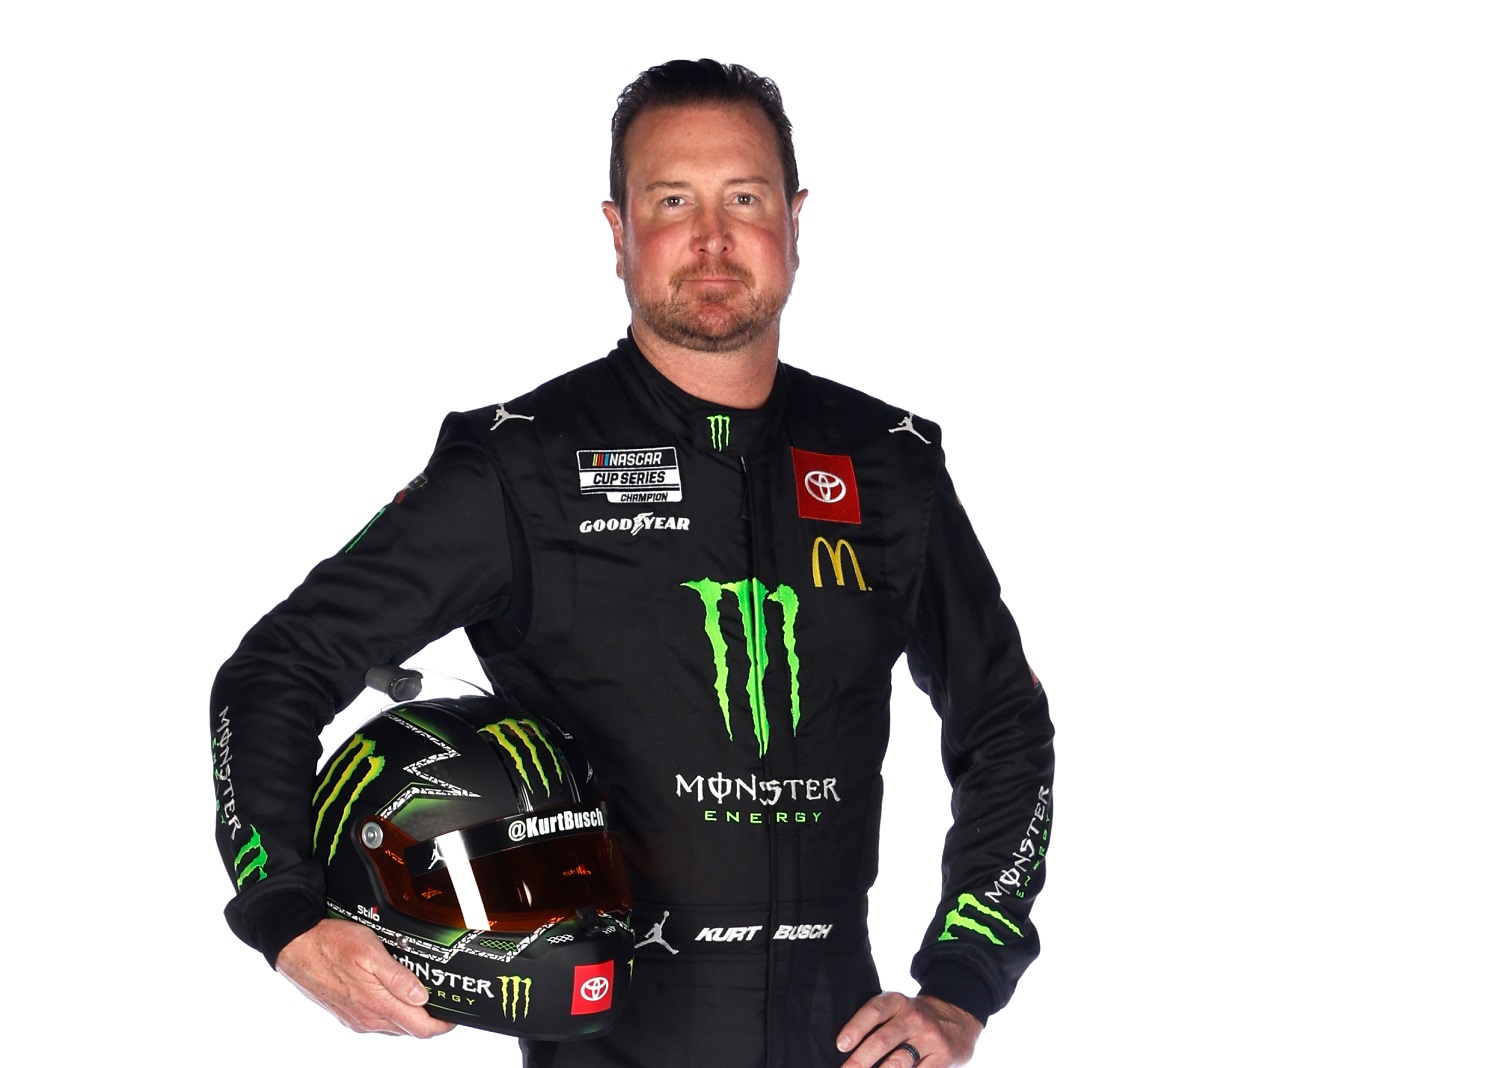 NASCAR Cup Series star Kurt Busch poses for a photo during NASCAR Production Days at Clutch Studios on Jan. 19, 2022, in Concord, North Carolina.